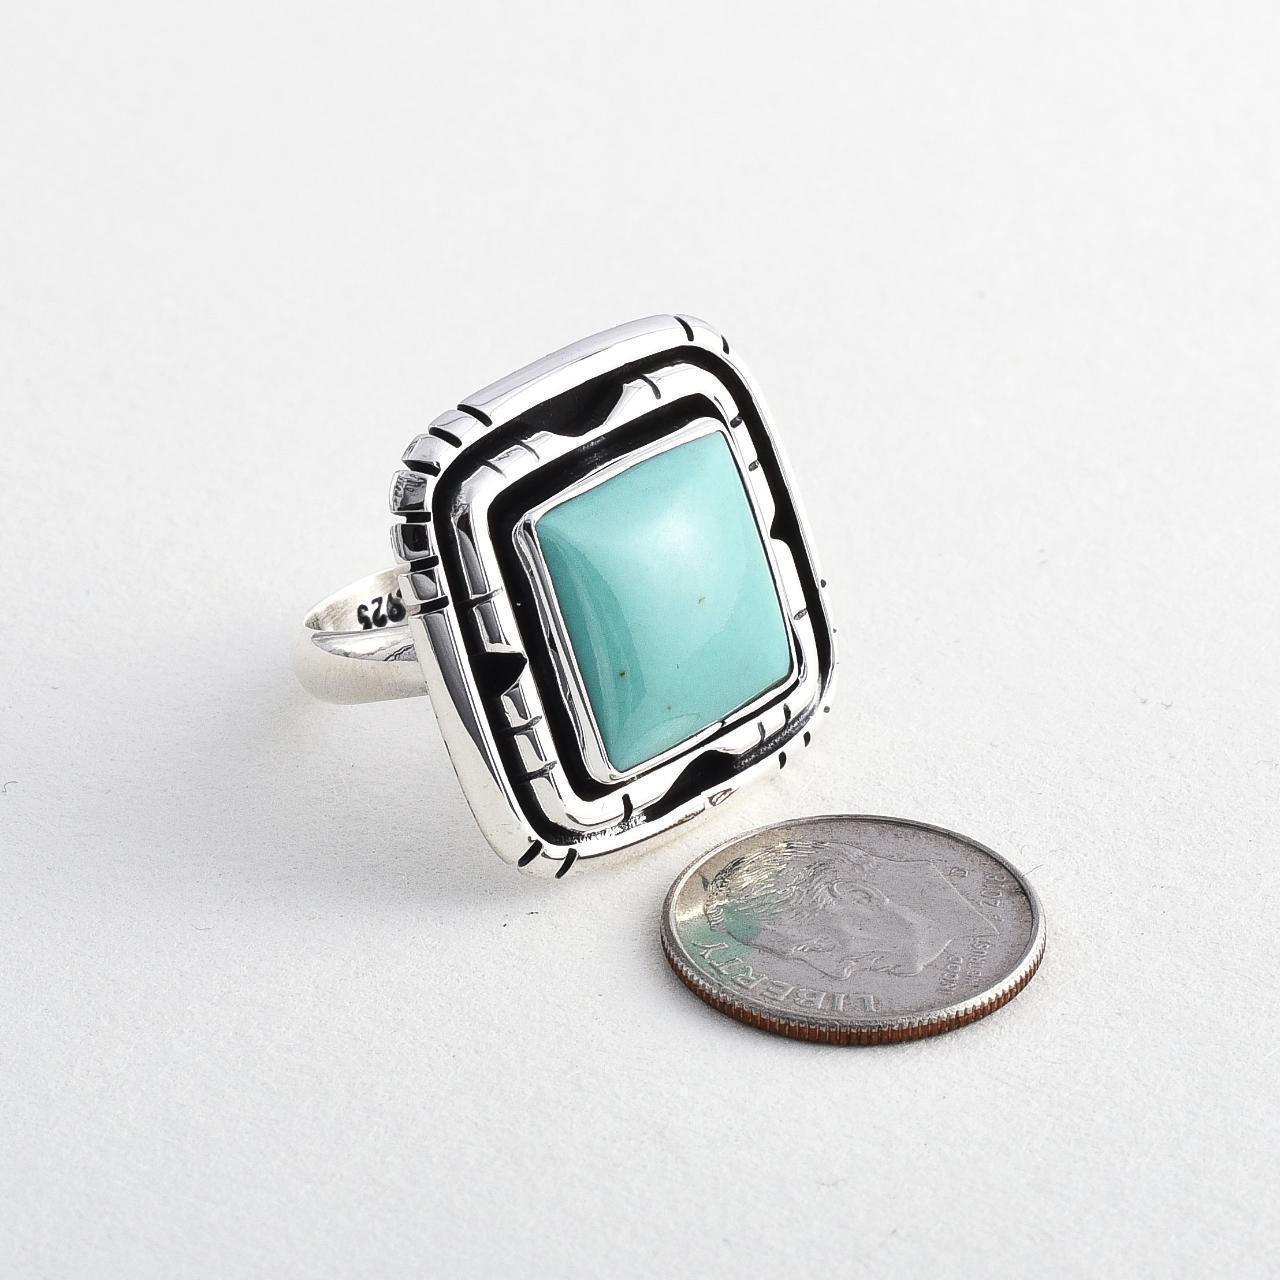 Product Image 2 - Sterling 925 Large Turquoise Ring

Sterling